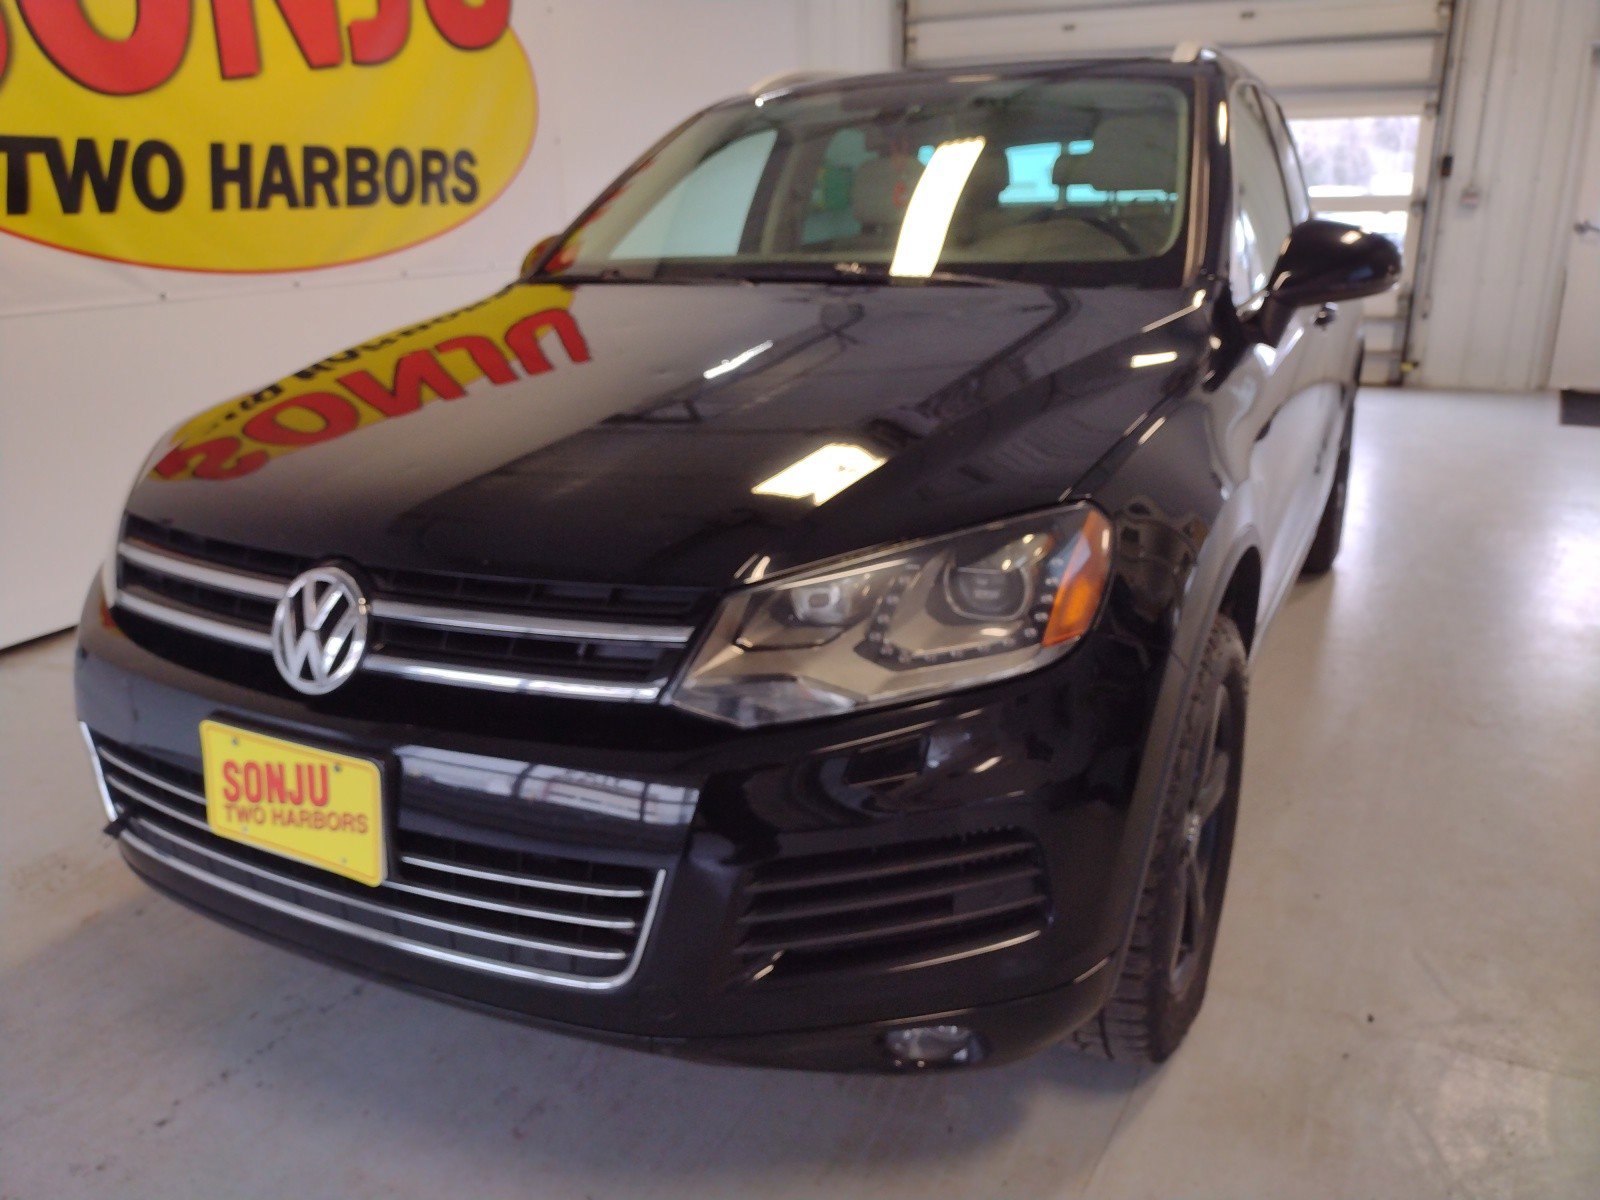 Used 2012 Volkswagen Touareg Sport with VIN WVGFK9BP7CD004915 for sale in Two Harbors, Minnesota